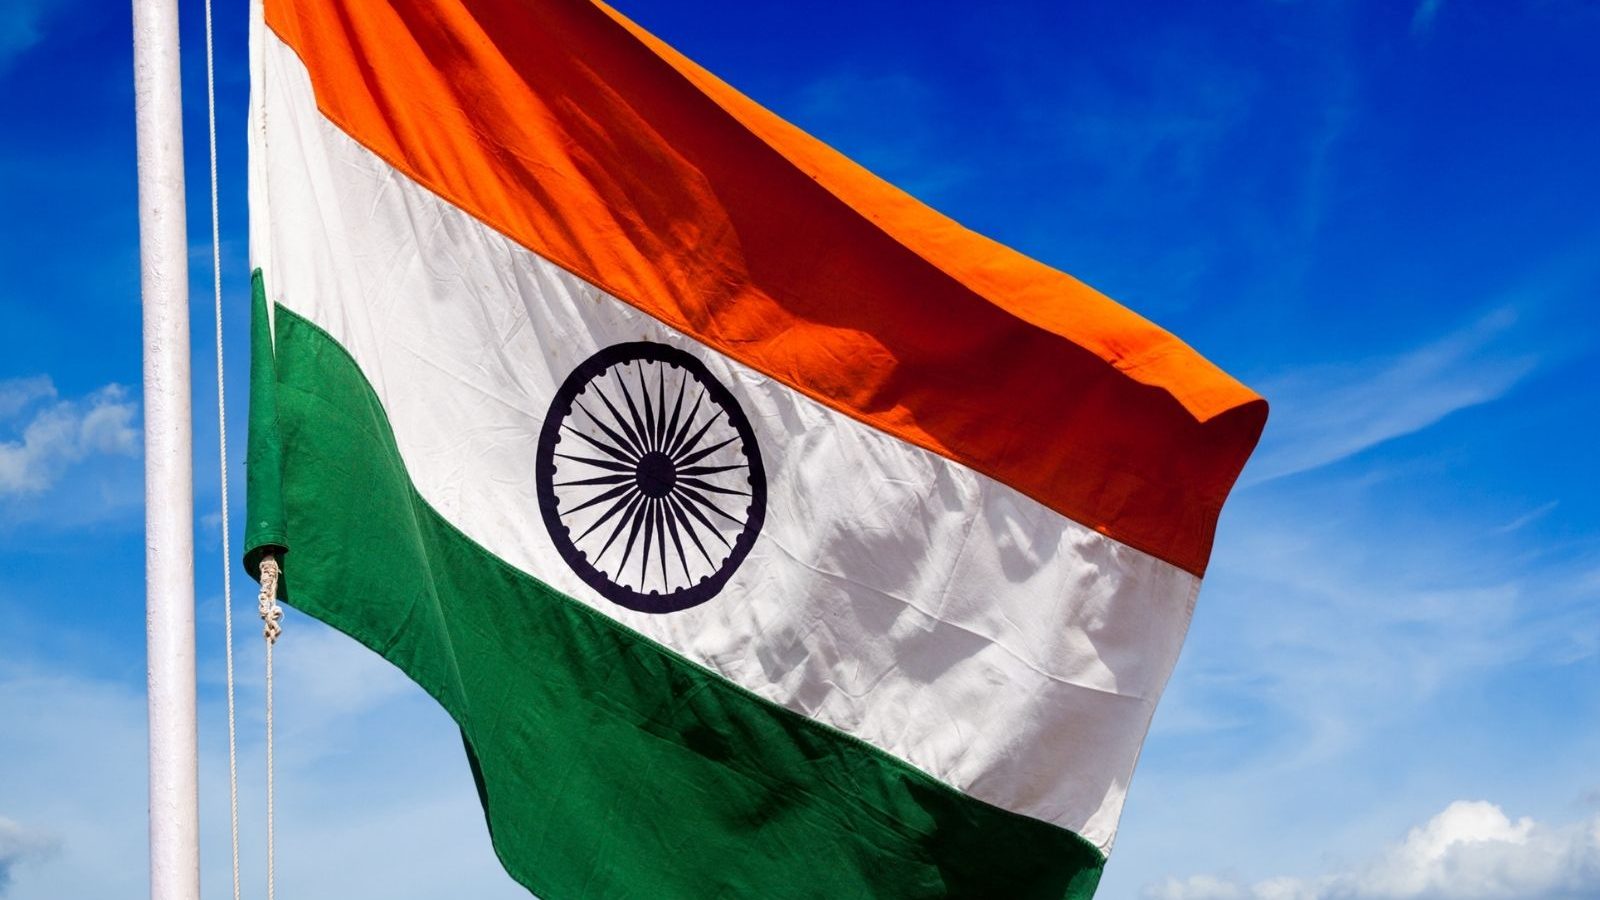 Republic Day 2022: History, Evolution and Significance of Indian Tricolour